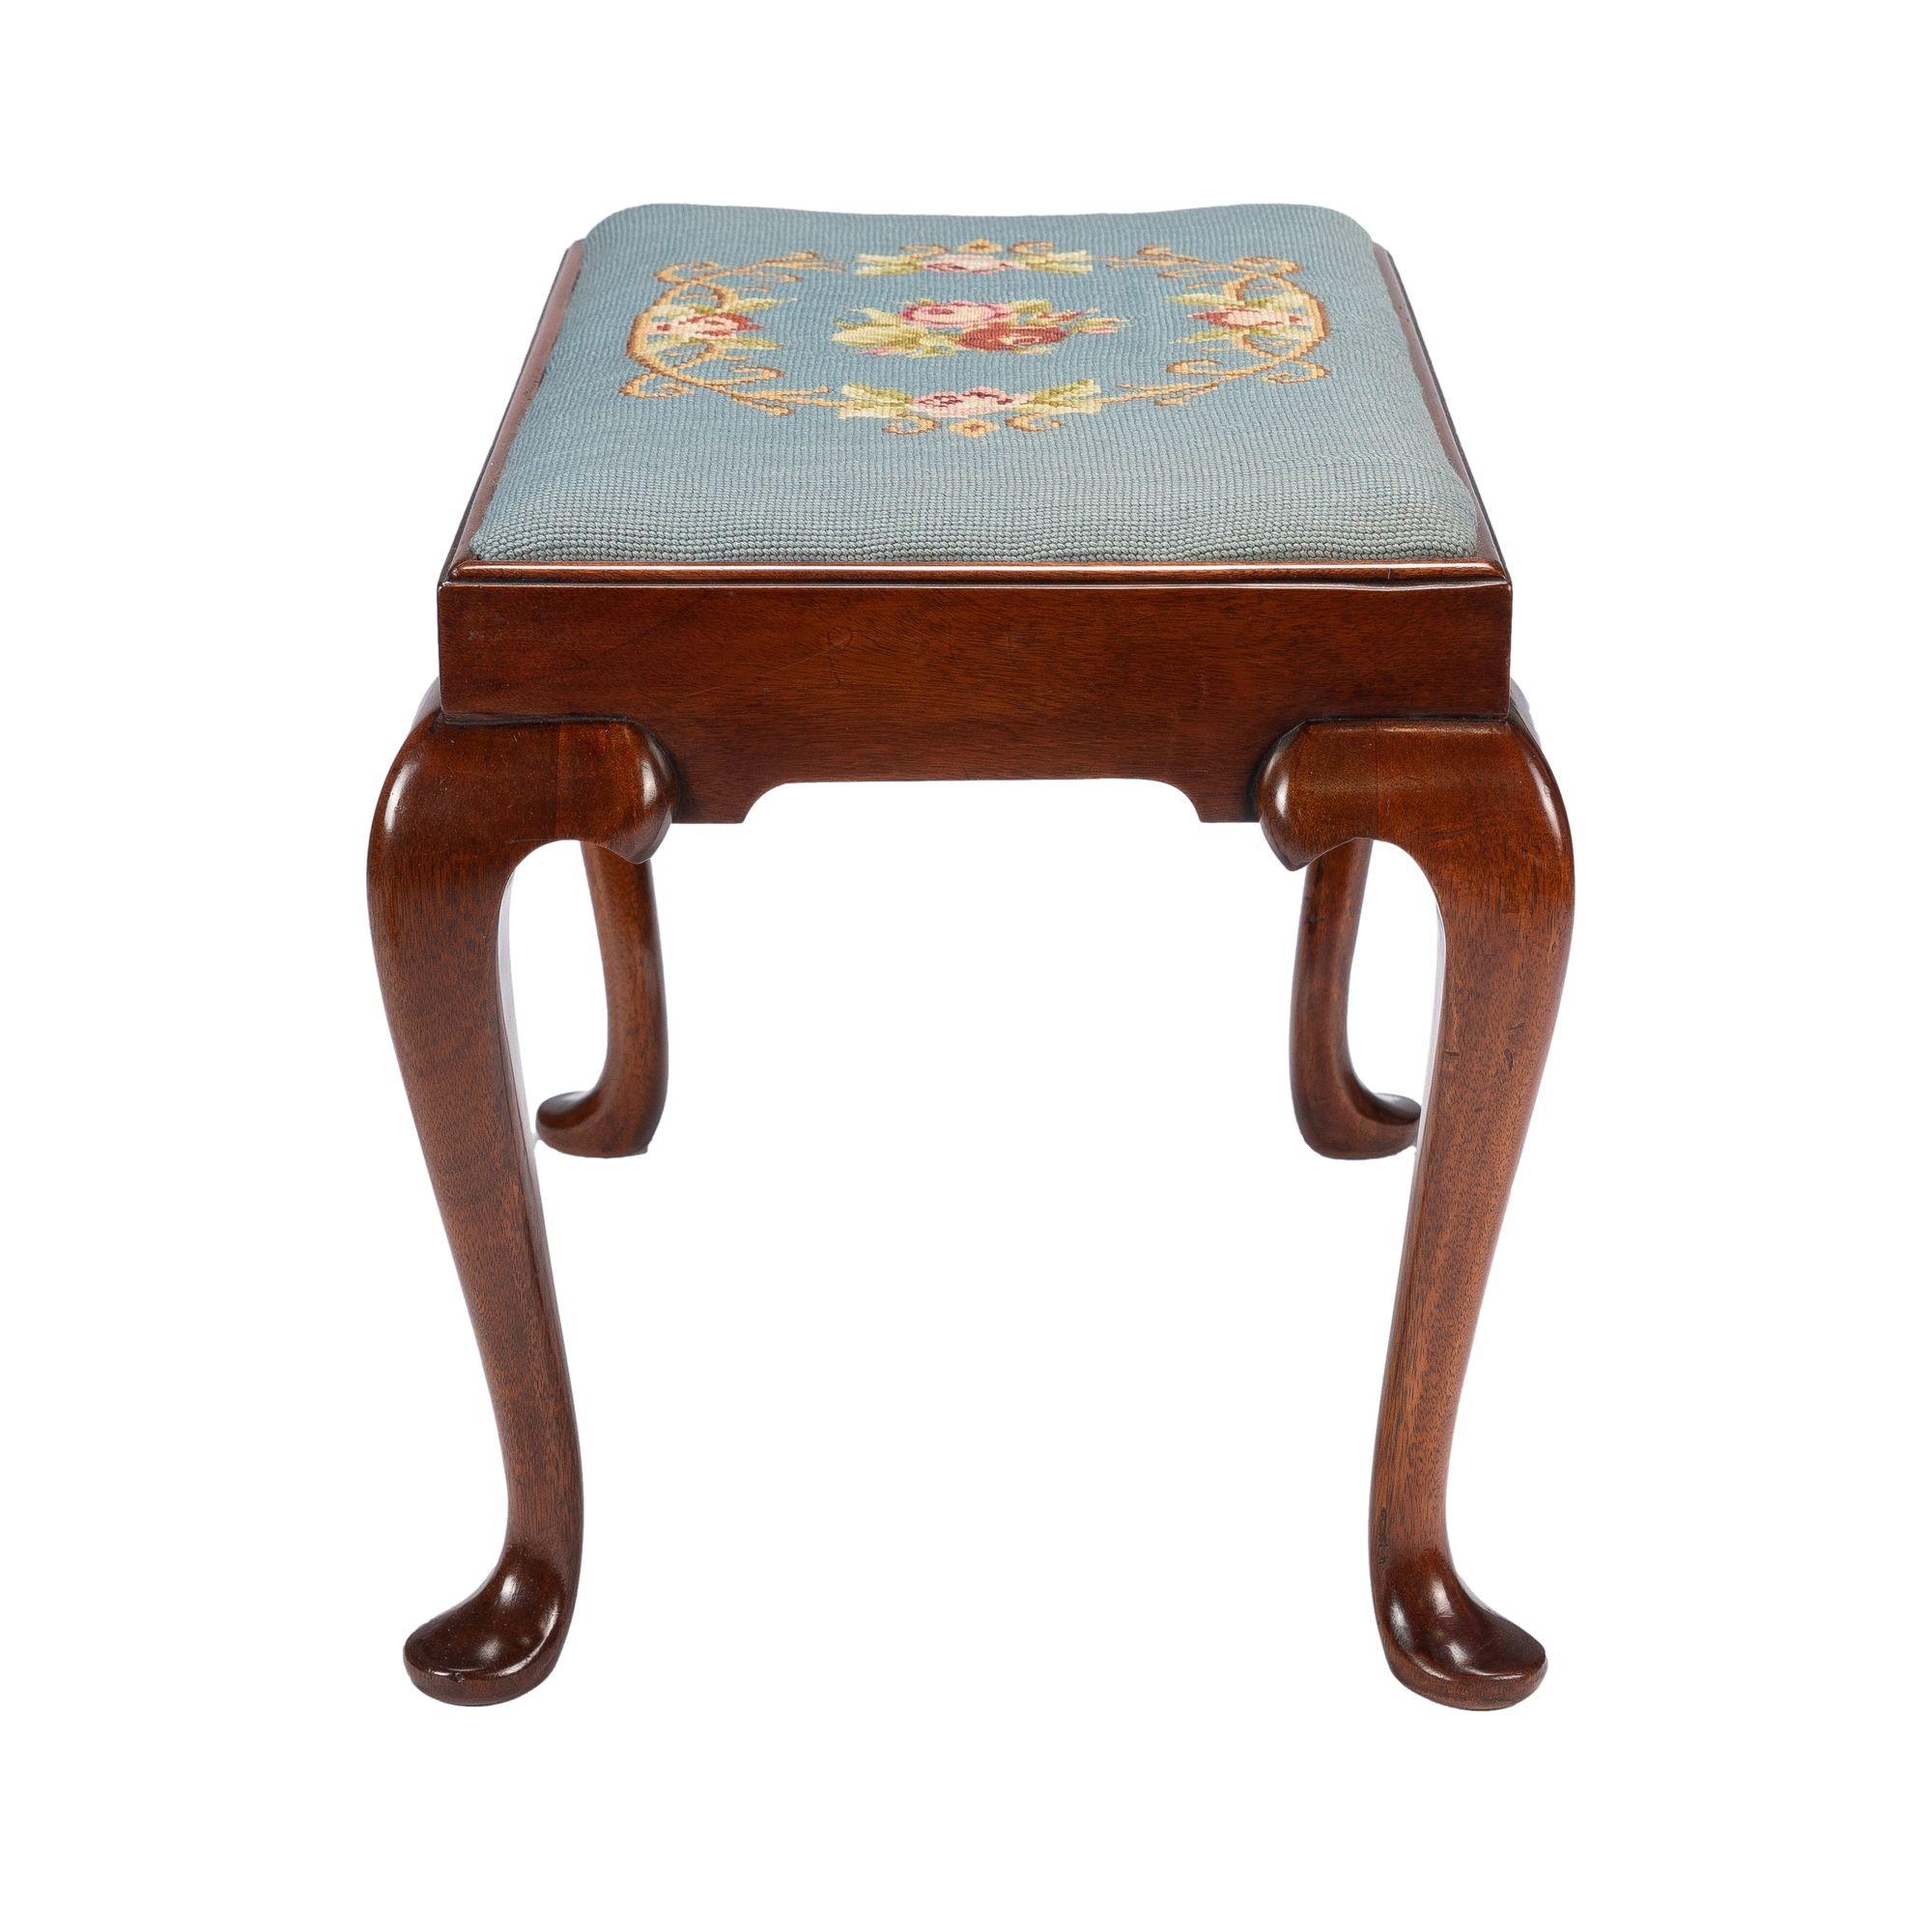 20th Century American Queen Anne Style Slip Seat Mahogany Stool, 1900-1950 For Sale